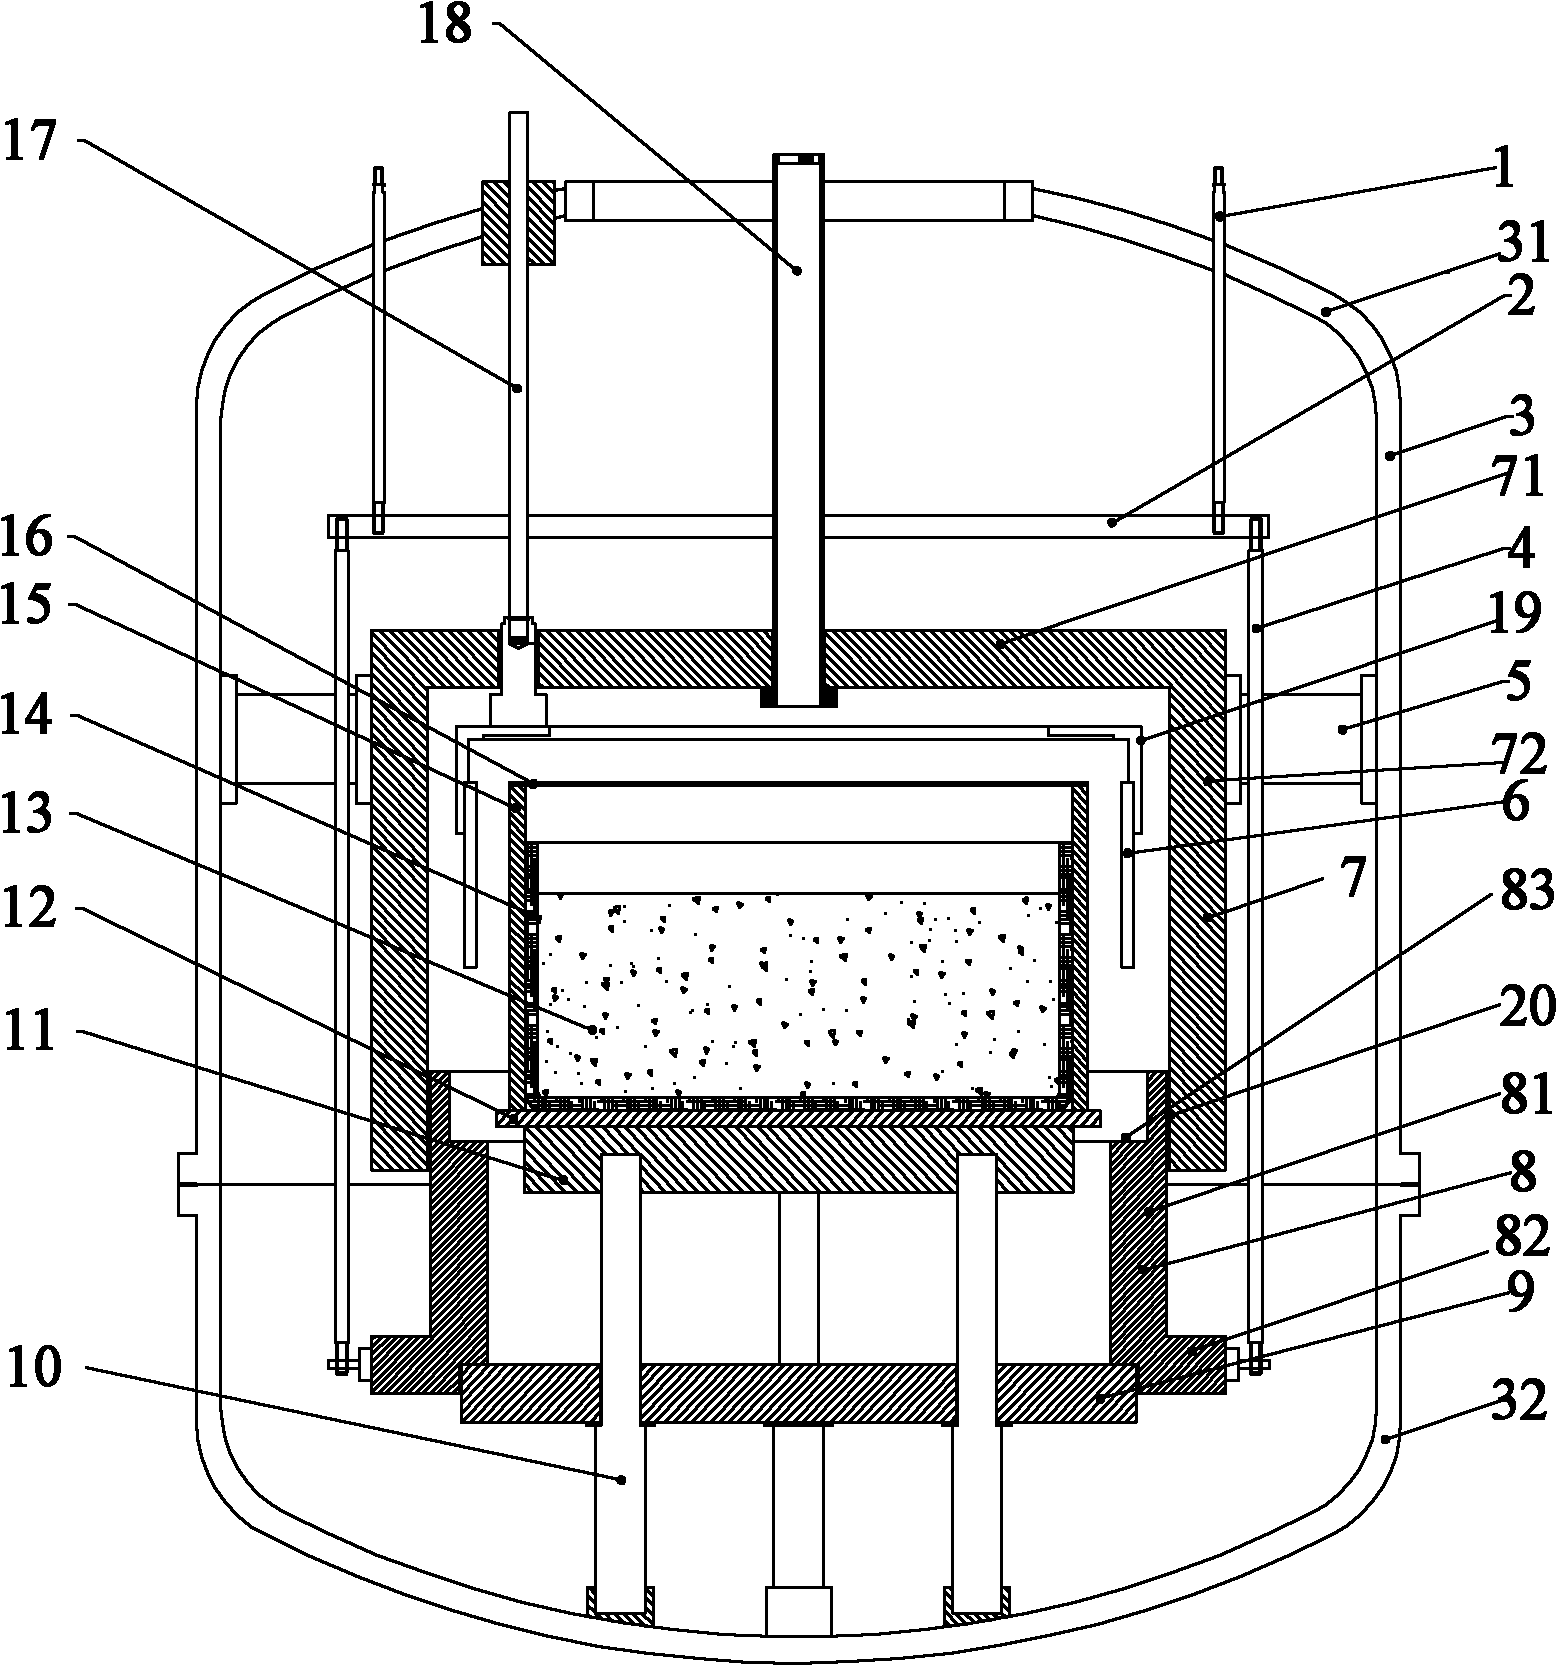 Thermal field structure of polysilicon ingot casting furnace